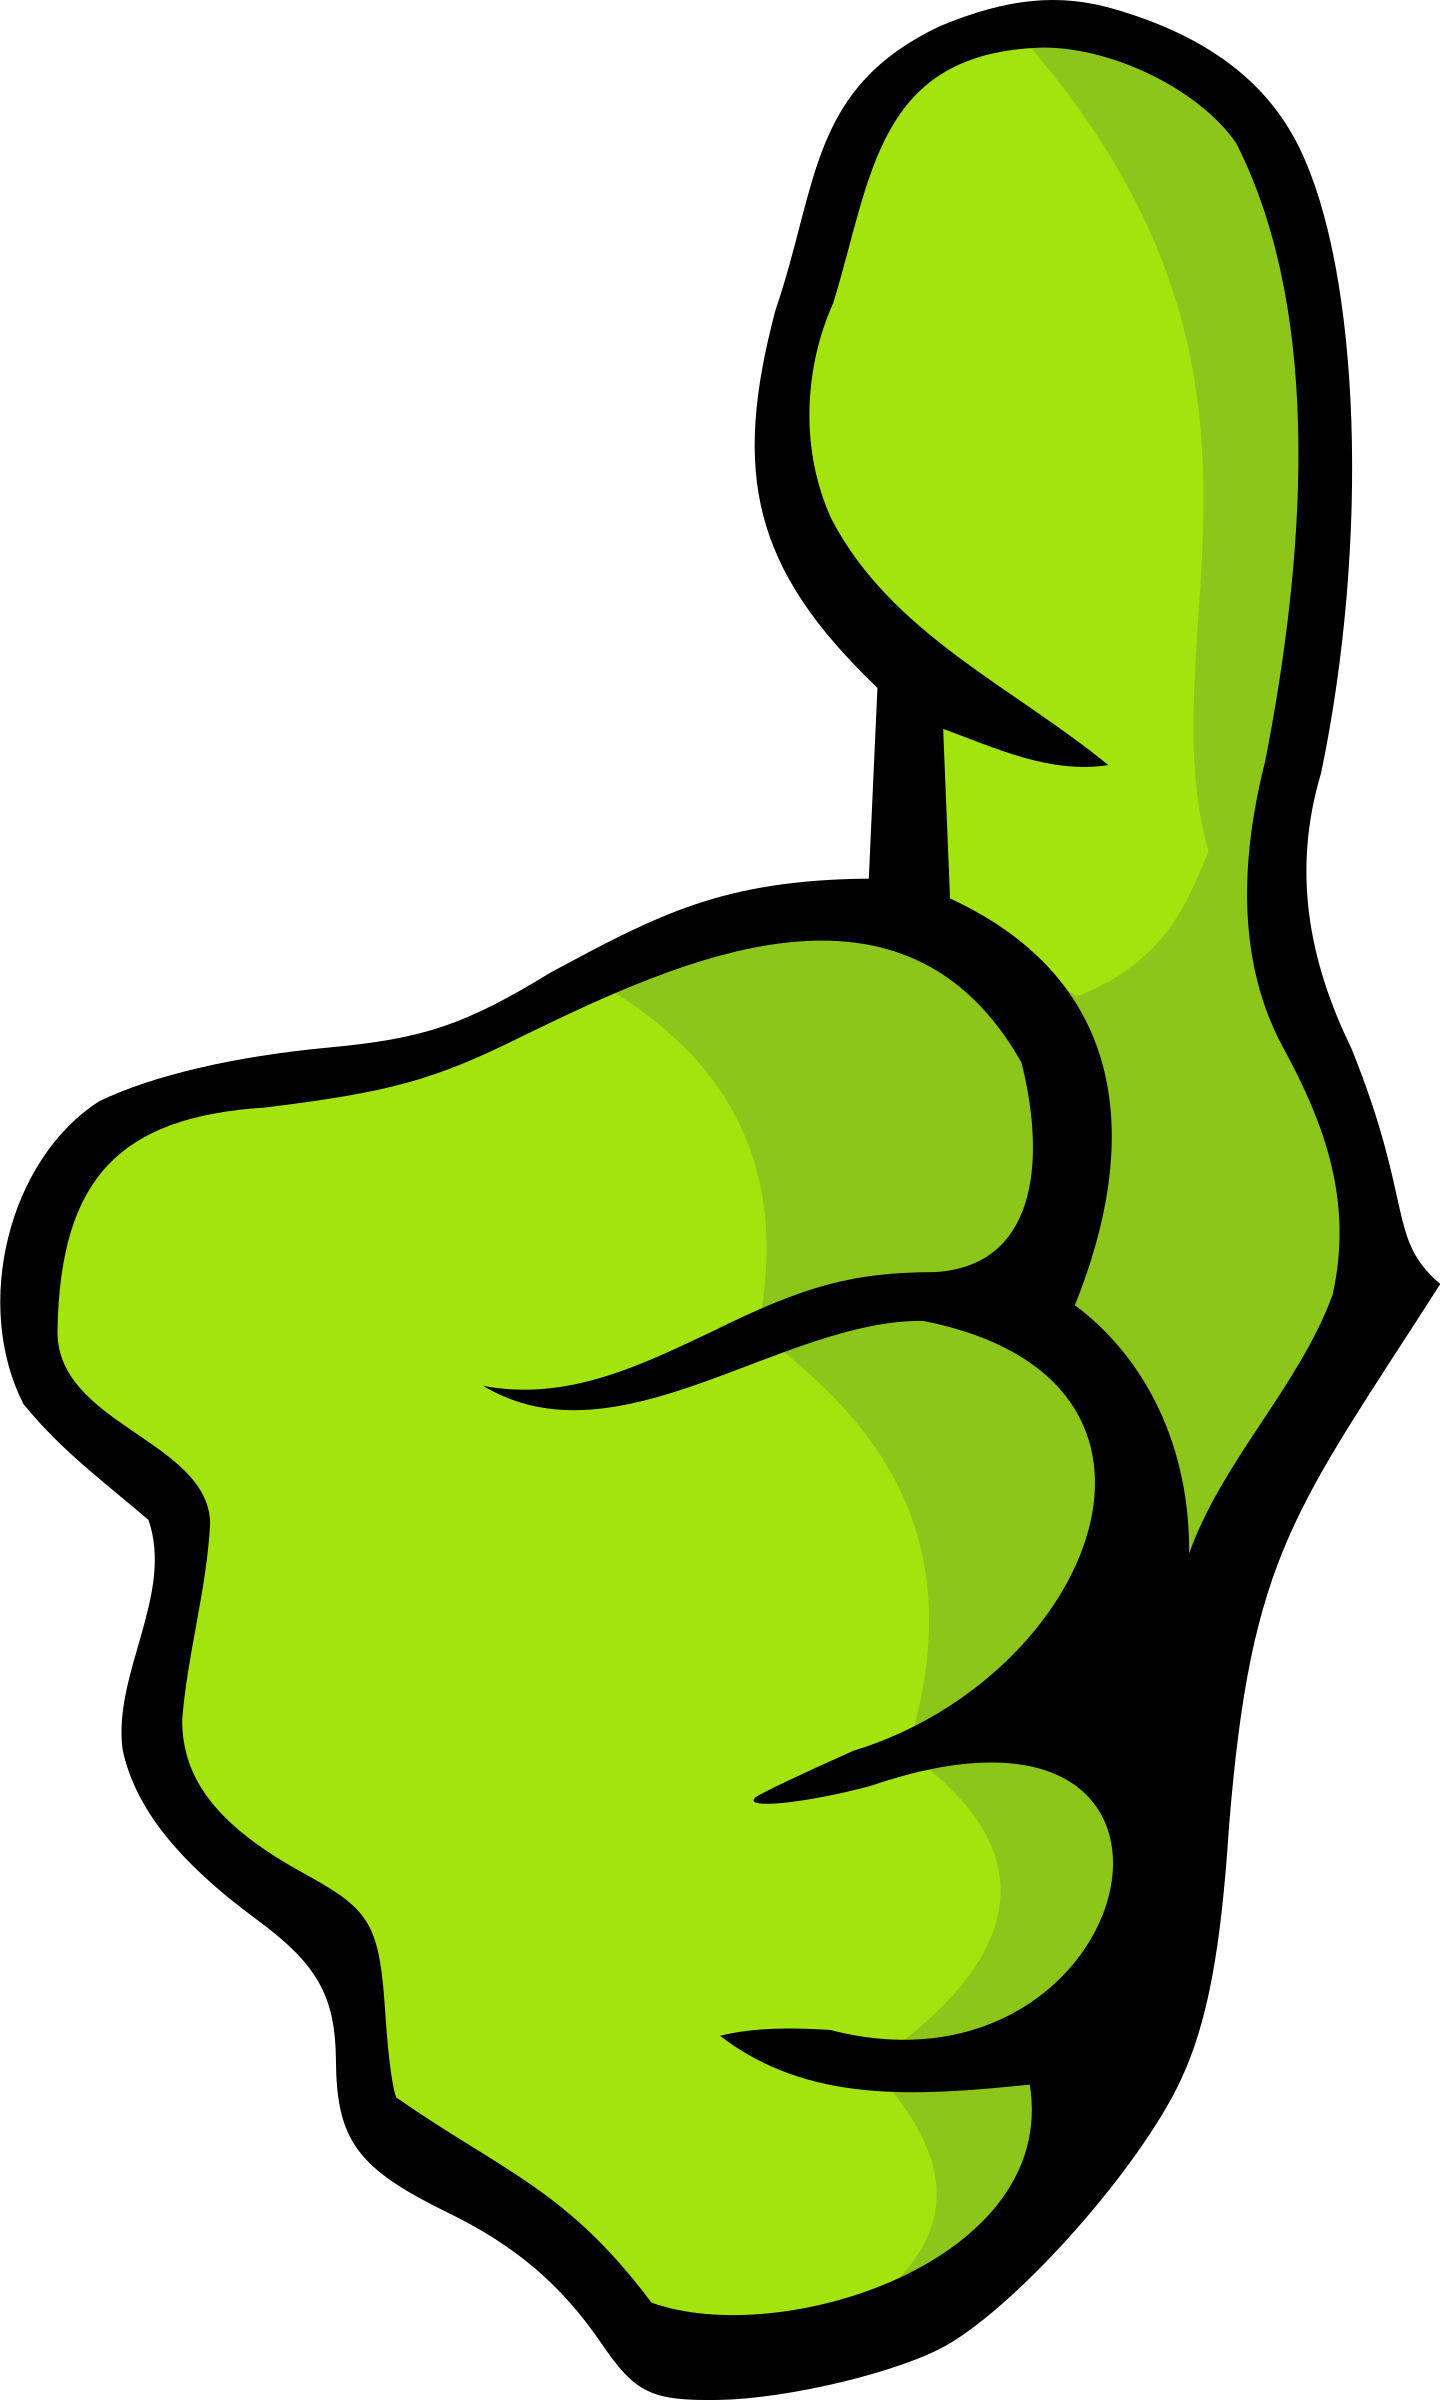 microsoft clipart thumbs up - photo #22